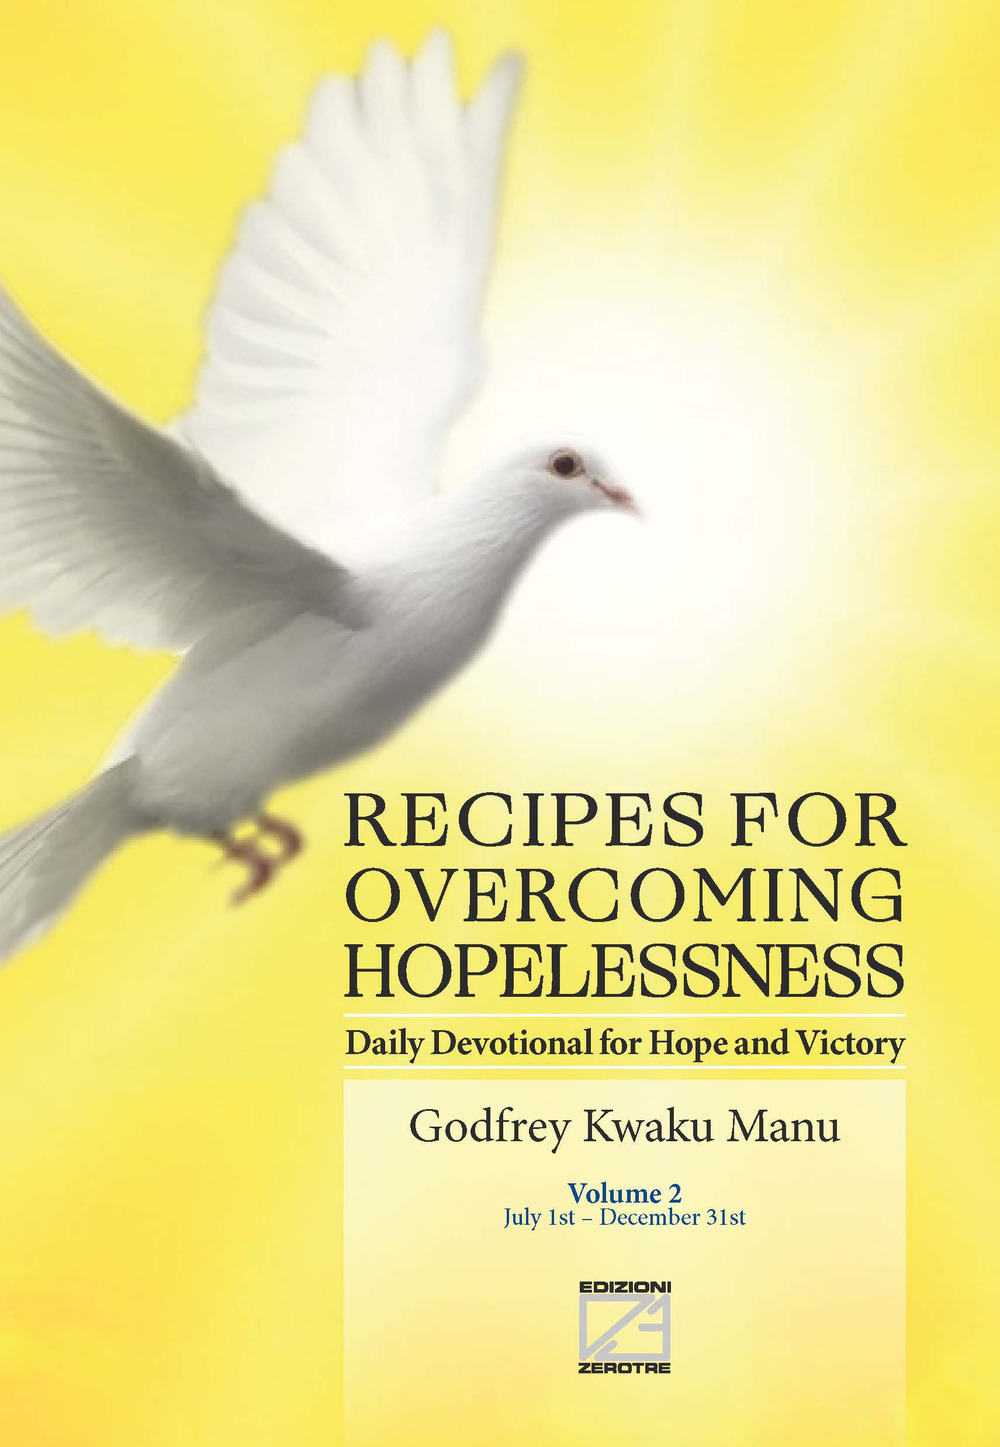 Recipes for overcoming hopelessness. Daily devotional for hope and victory. Vol. 2: July 1st-December 31st